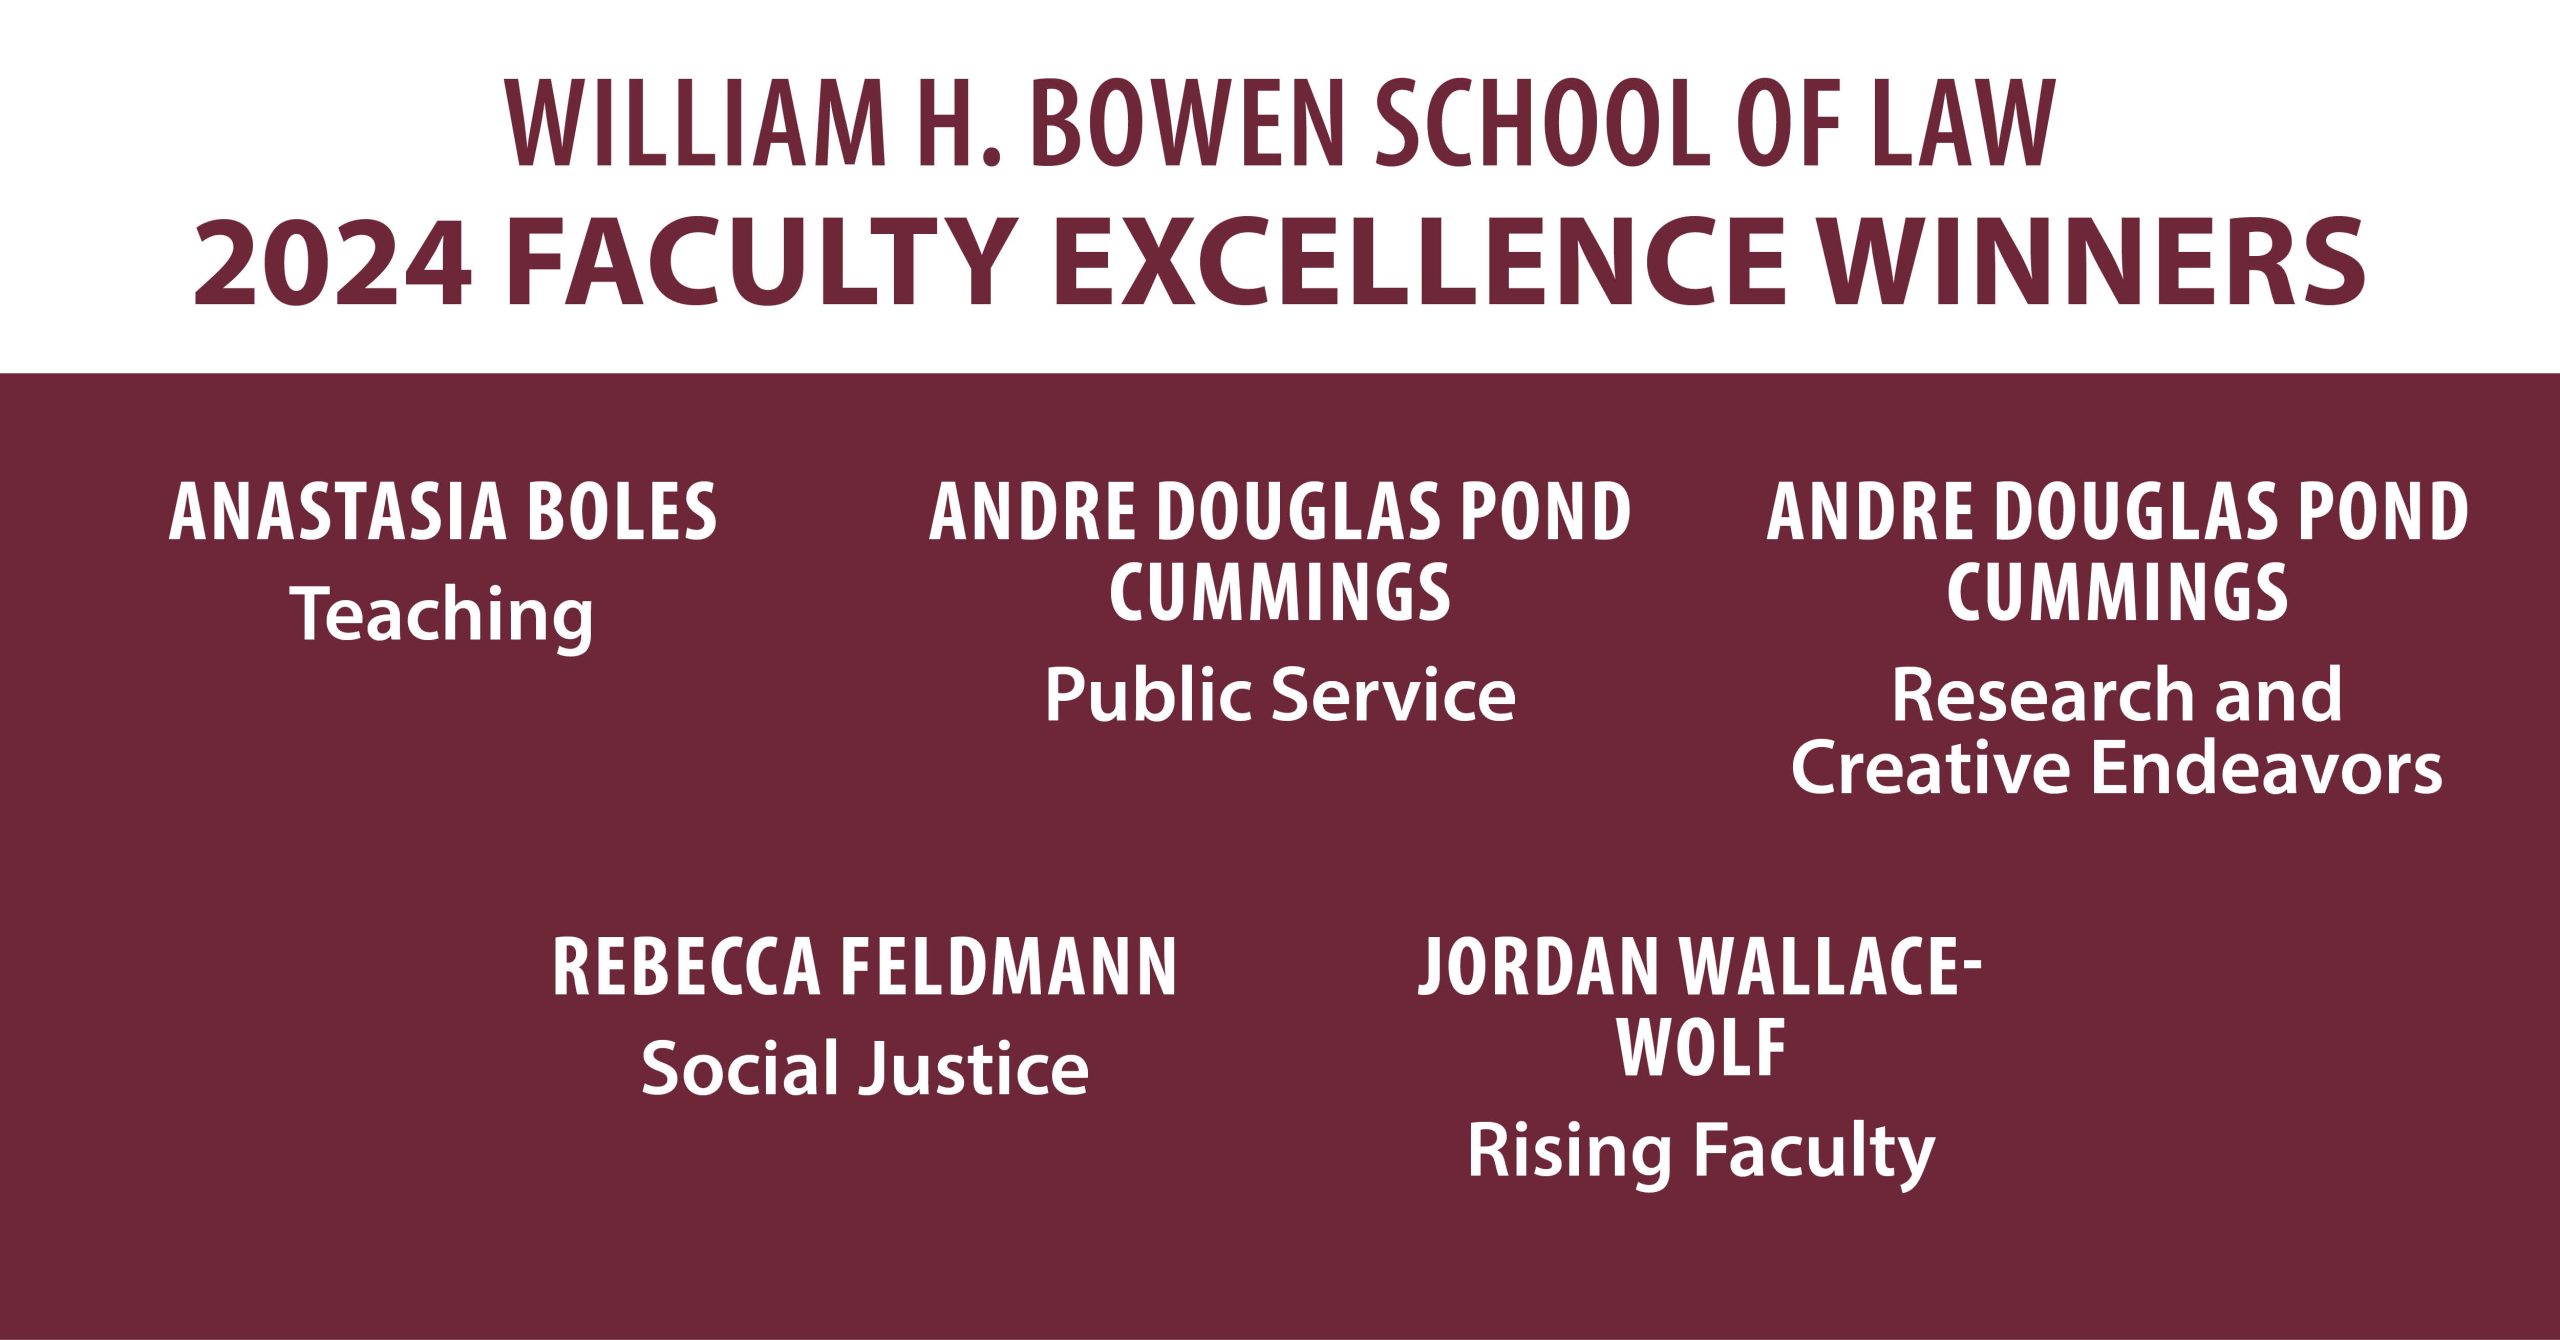 Professors Anastasia Boles, Jordan Wallace-Wolf, and Rebecca Feldmann as well as andré cummings,  associate dean for faculty development, were each recognized as outstanding faculty members of the William H. School of Law.